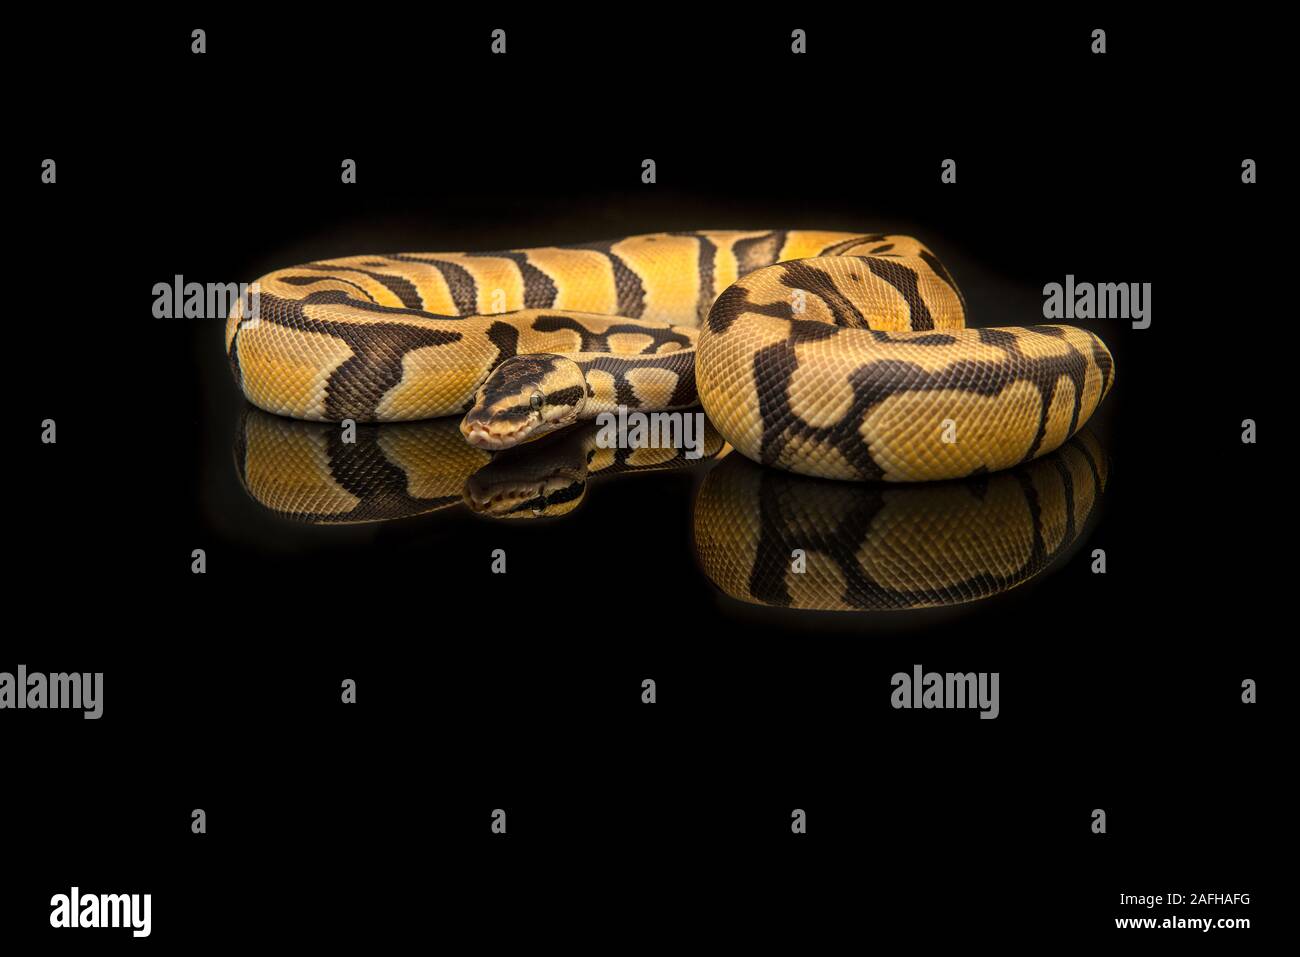 Pretty king python snake on a black background with reflection Stock Photo